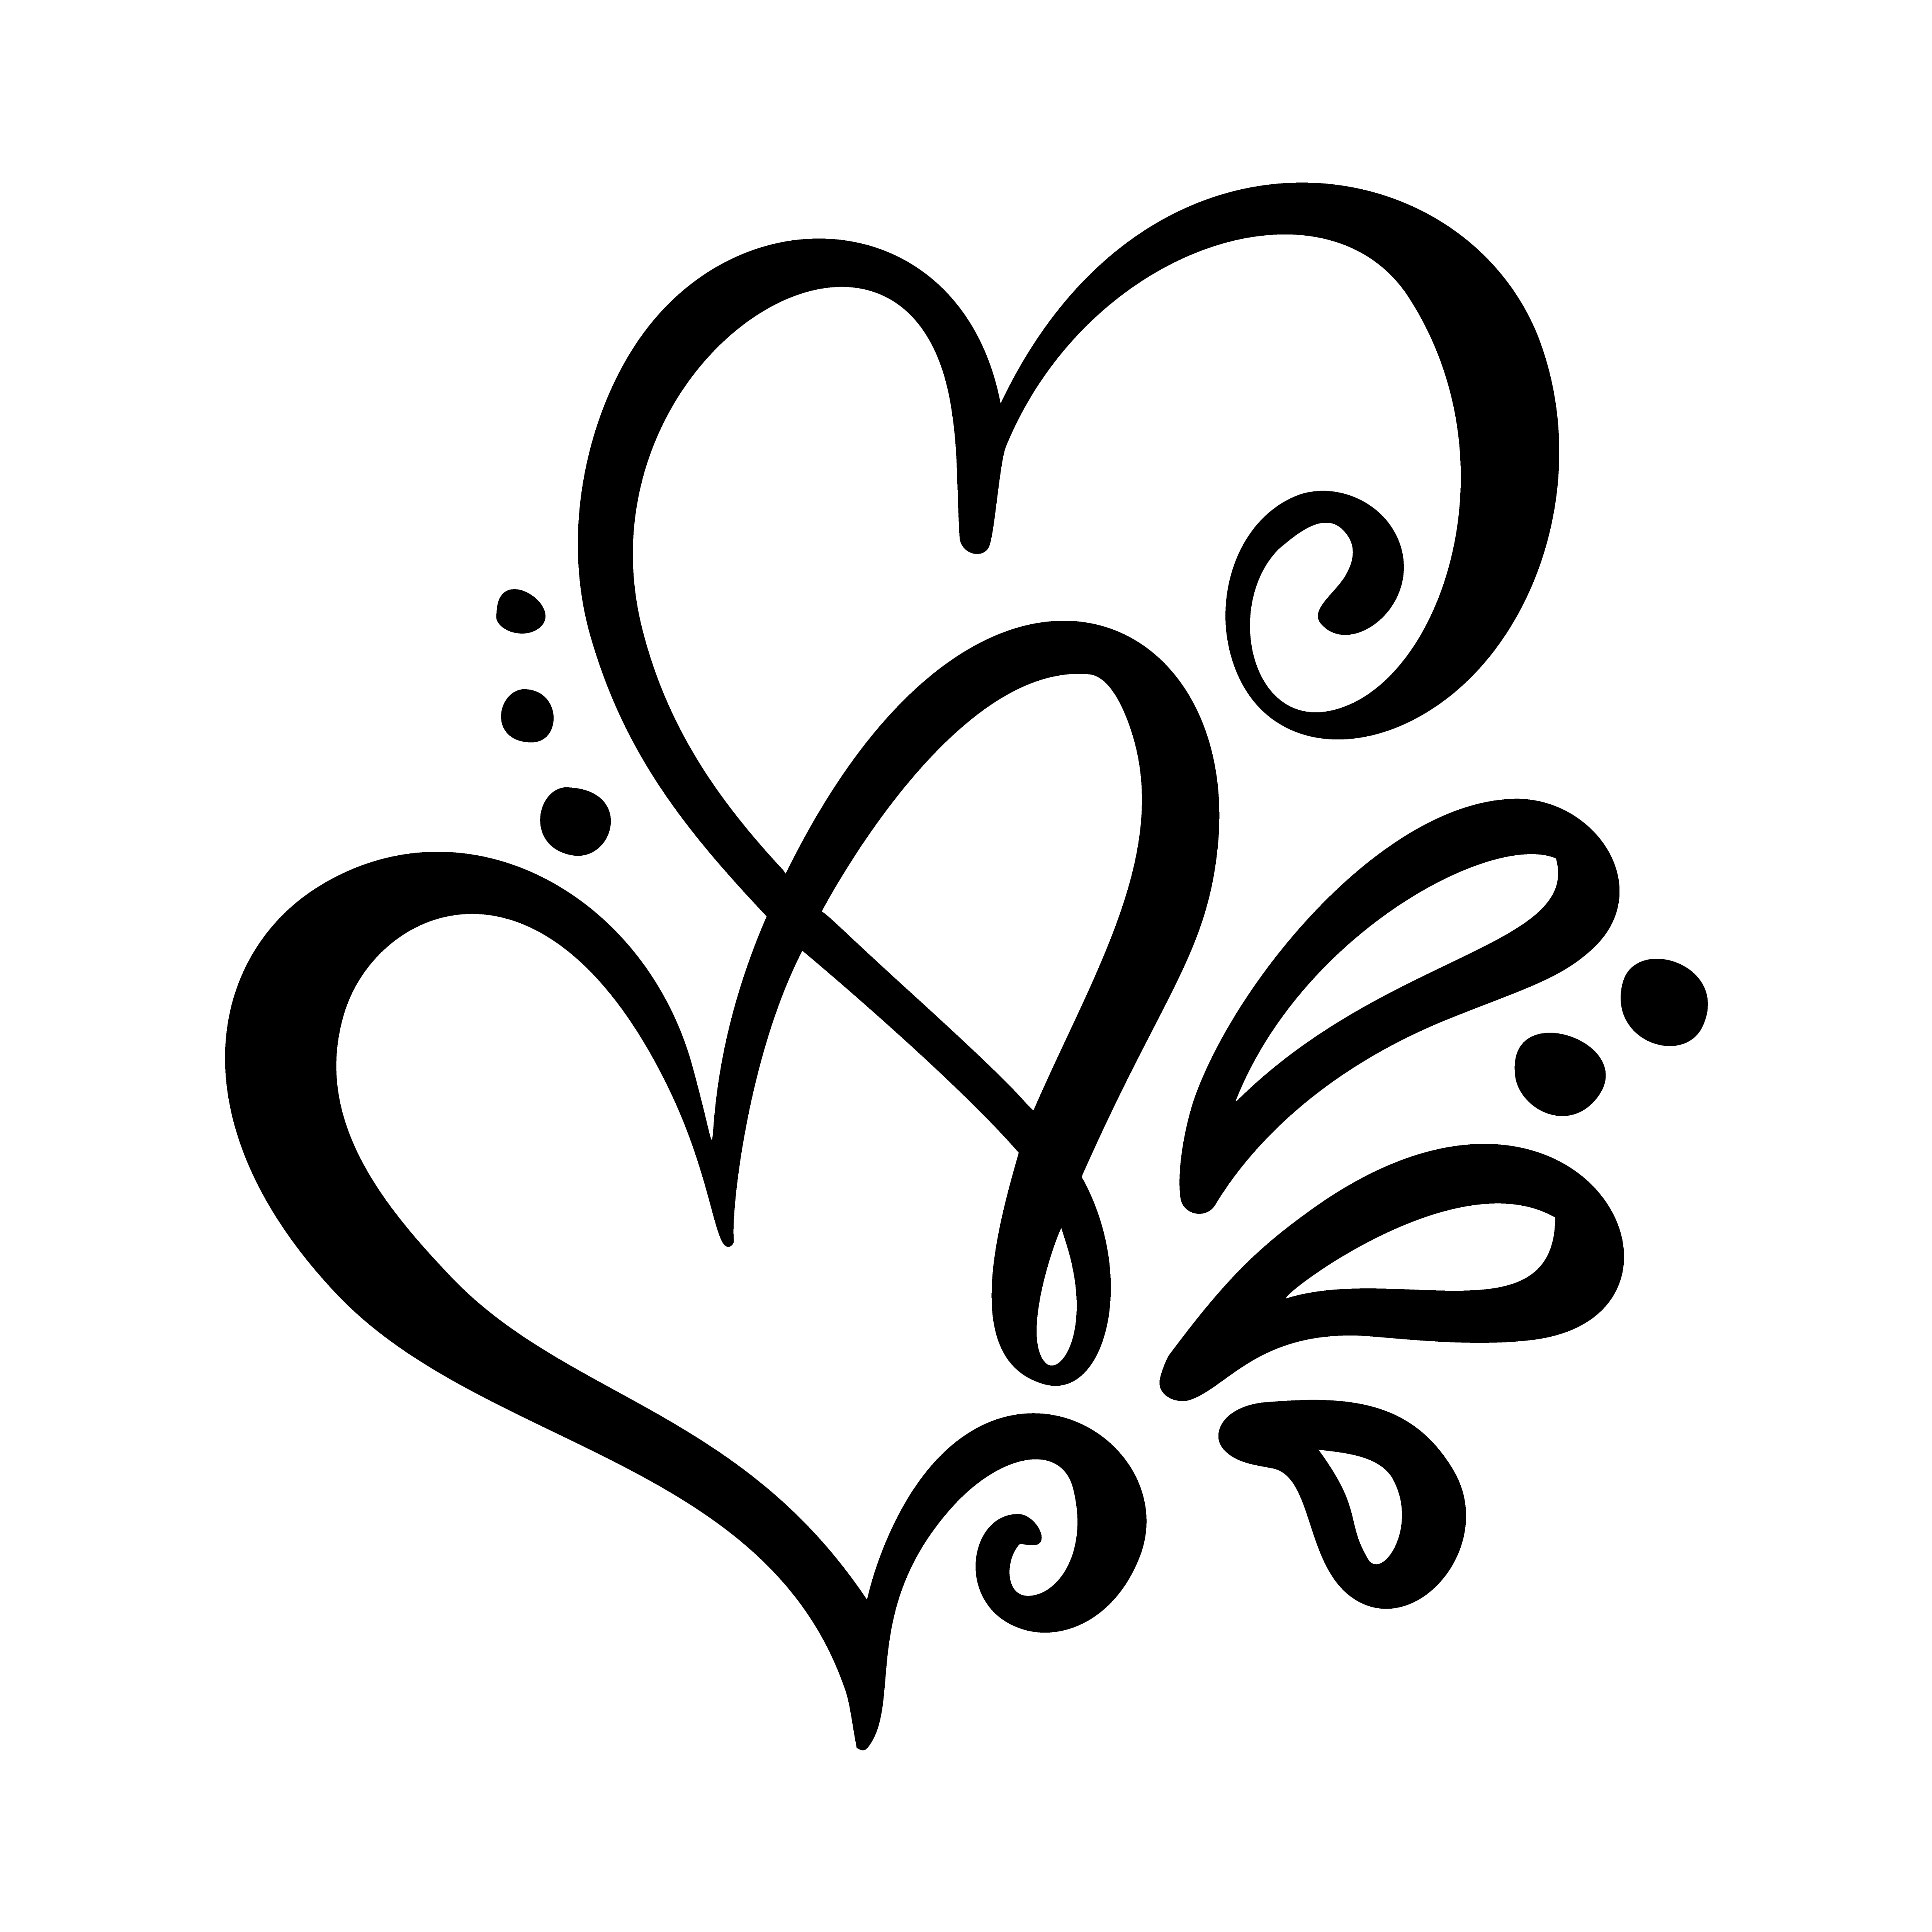 Two lover calligraphic hearts - Download Free Vectors ...